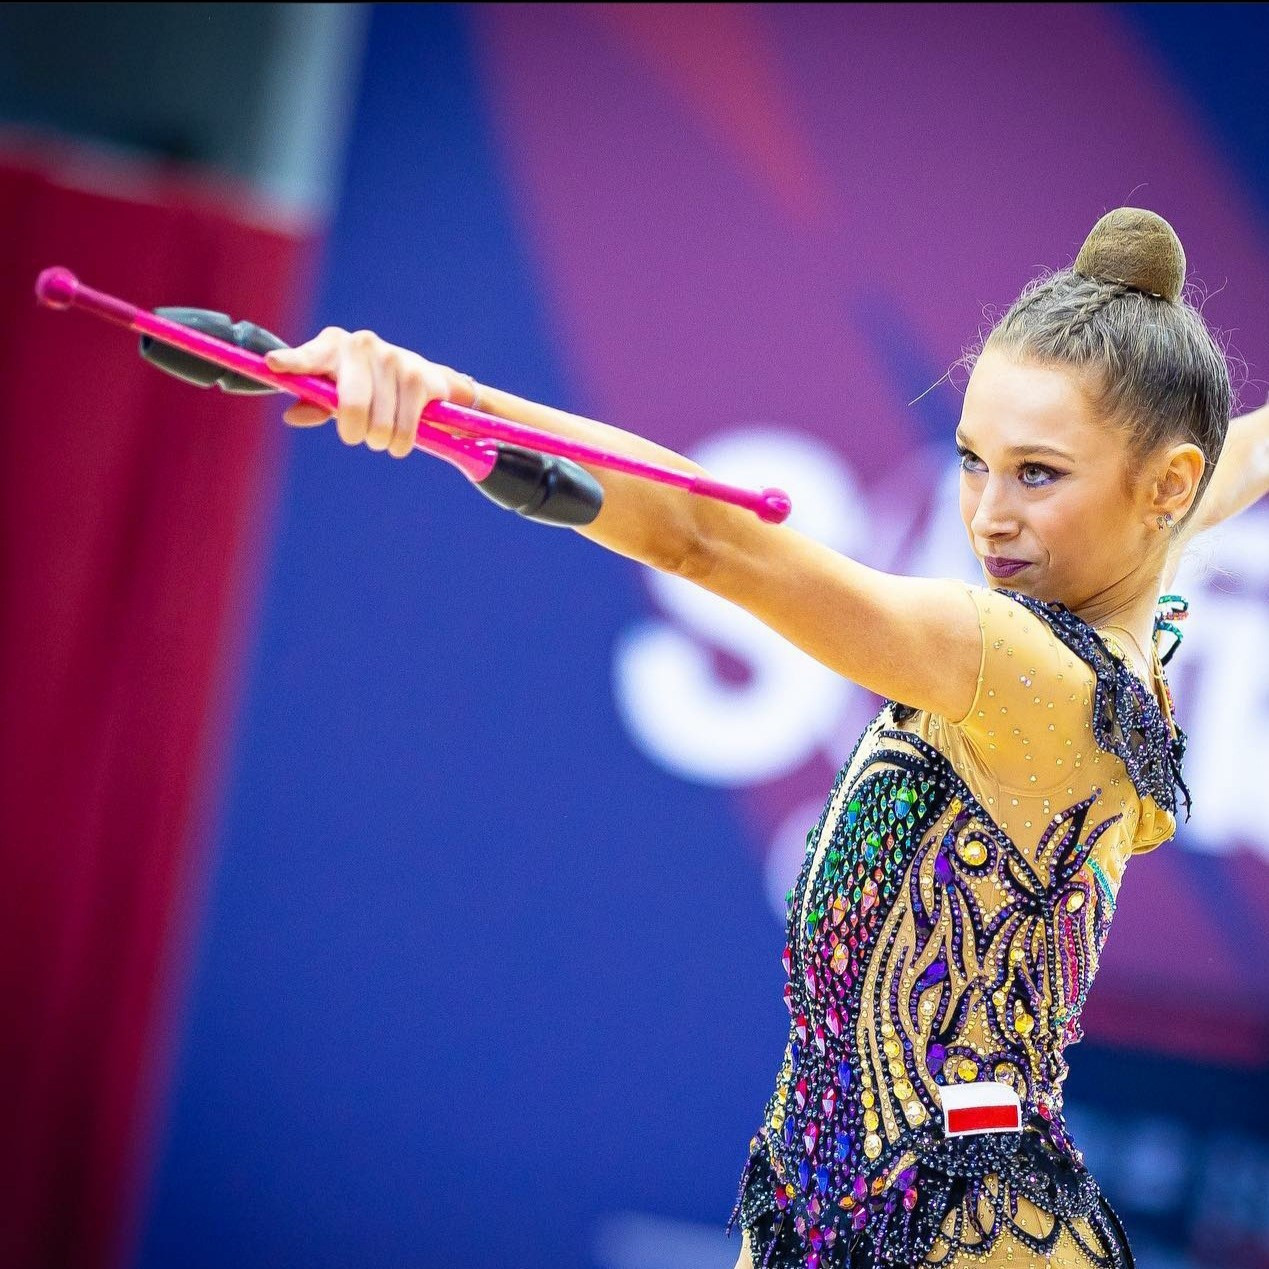 Lewińska’s stock continues to rise as she takes two individual titles at FIG Junior World Championships